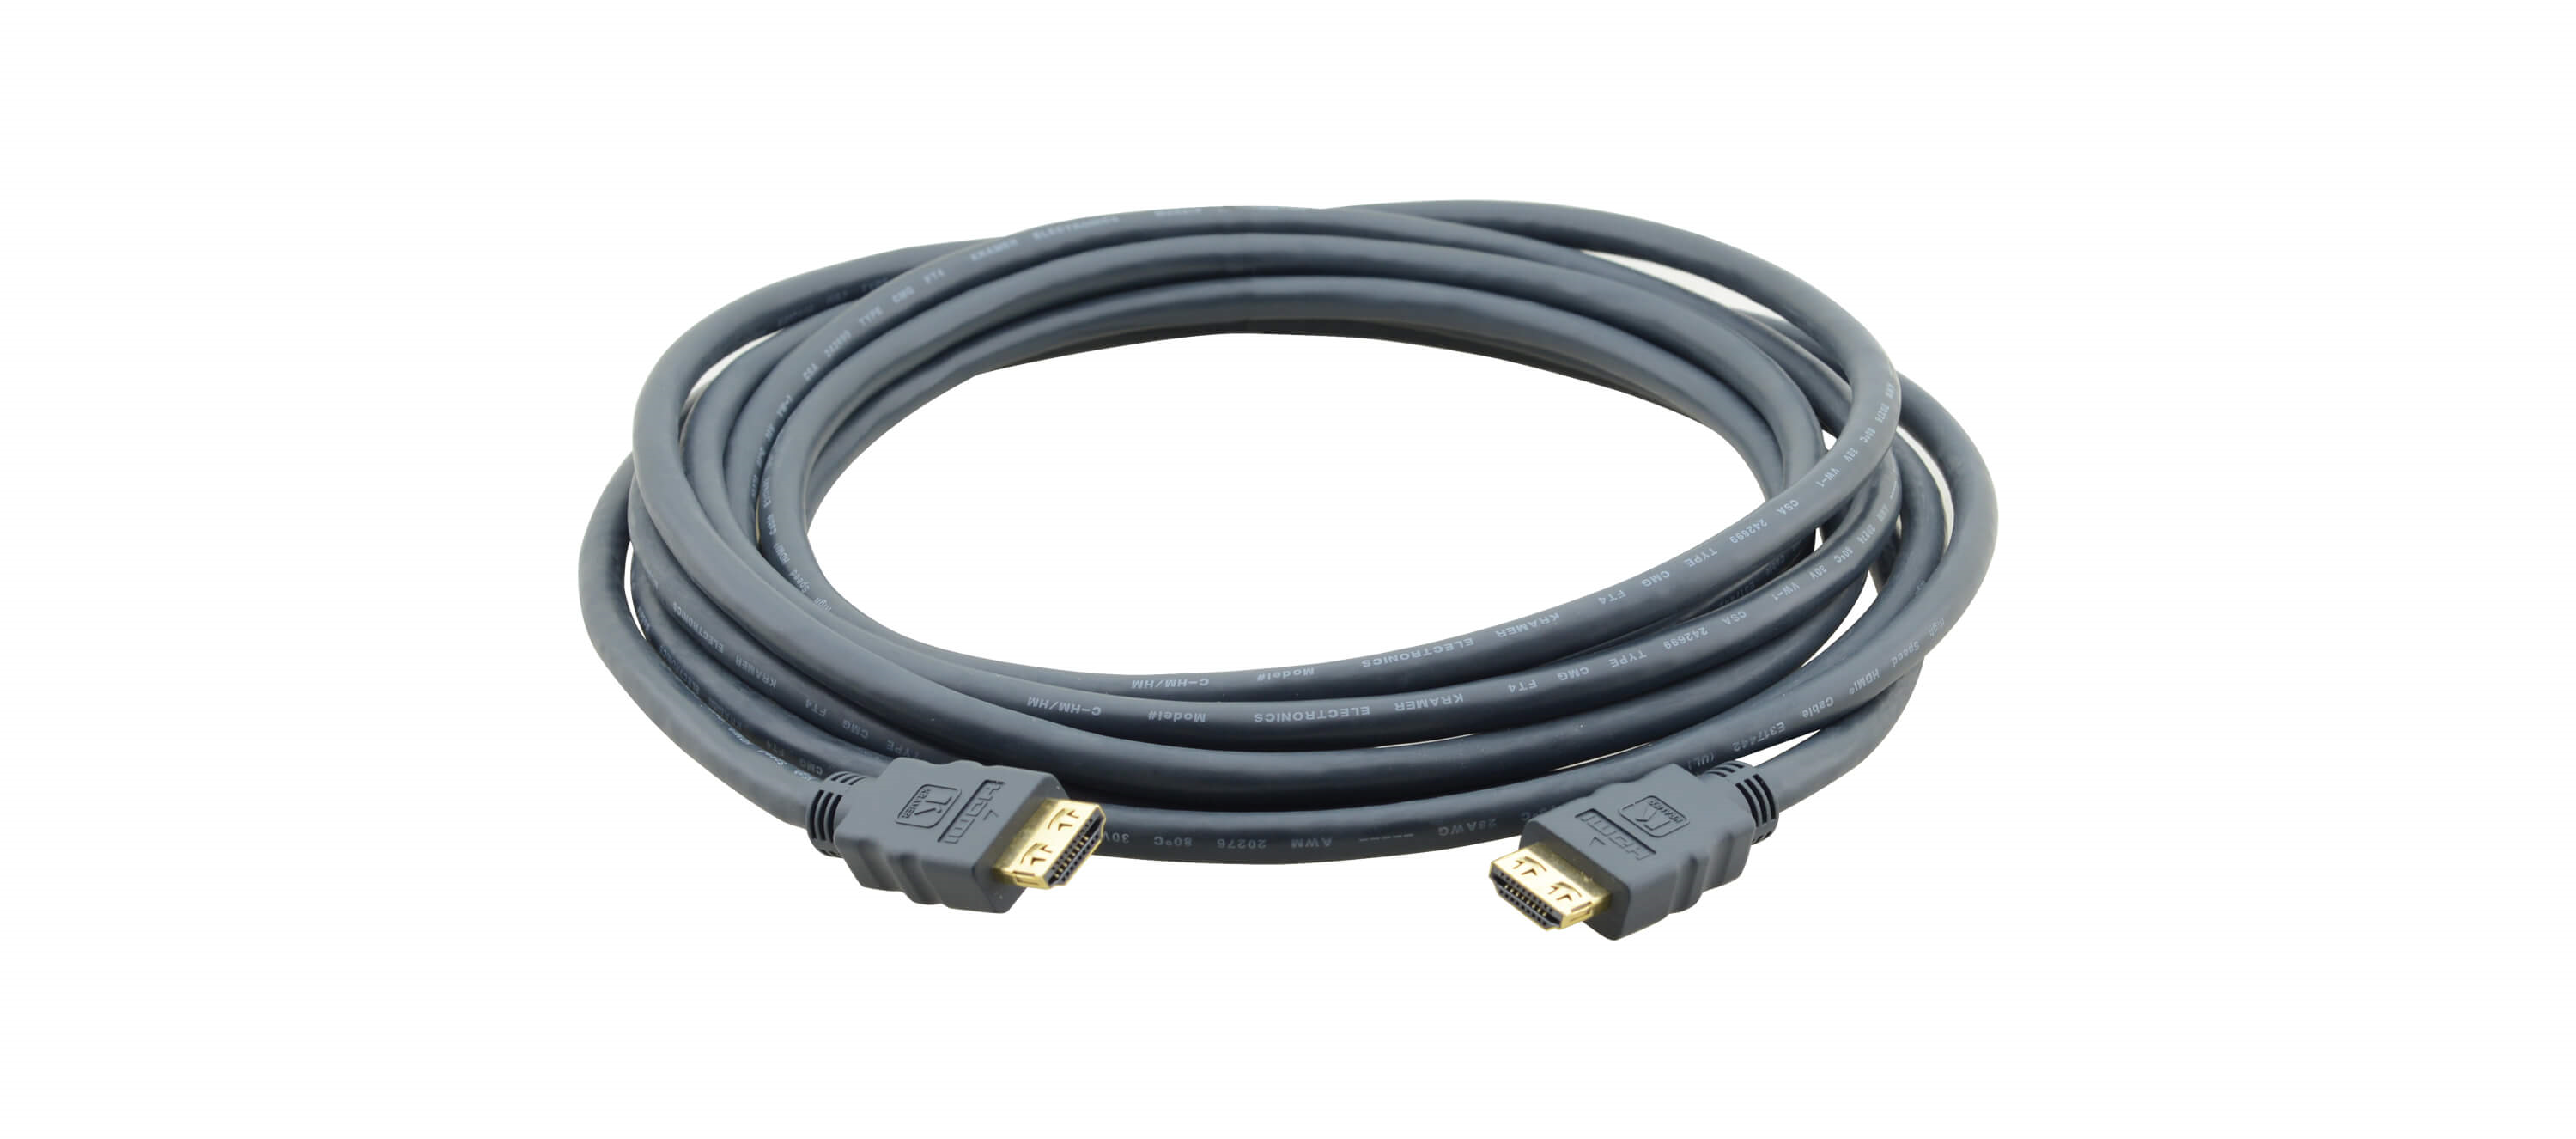 C-HM/HM/ETH-10 High–Speed HDMI Cable with Ethernet - 10'